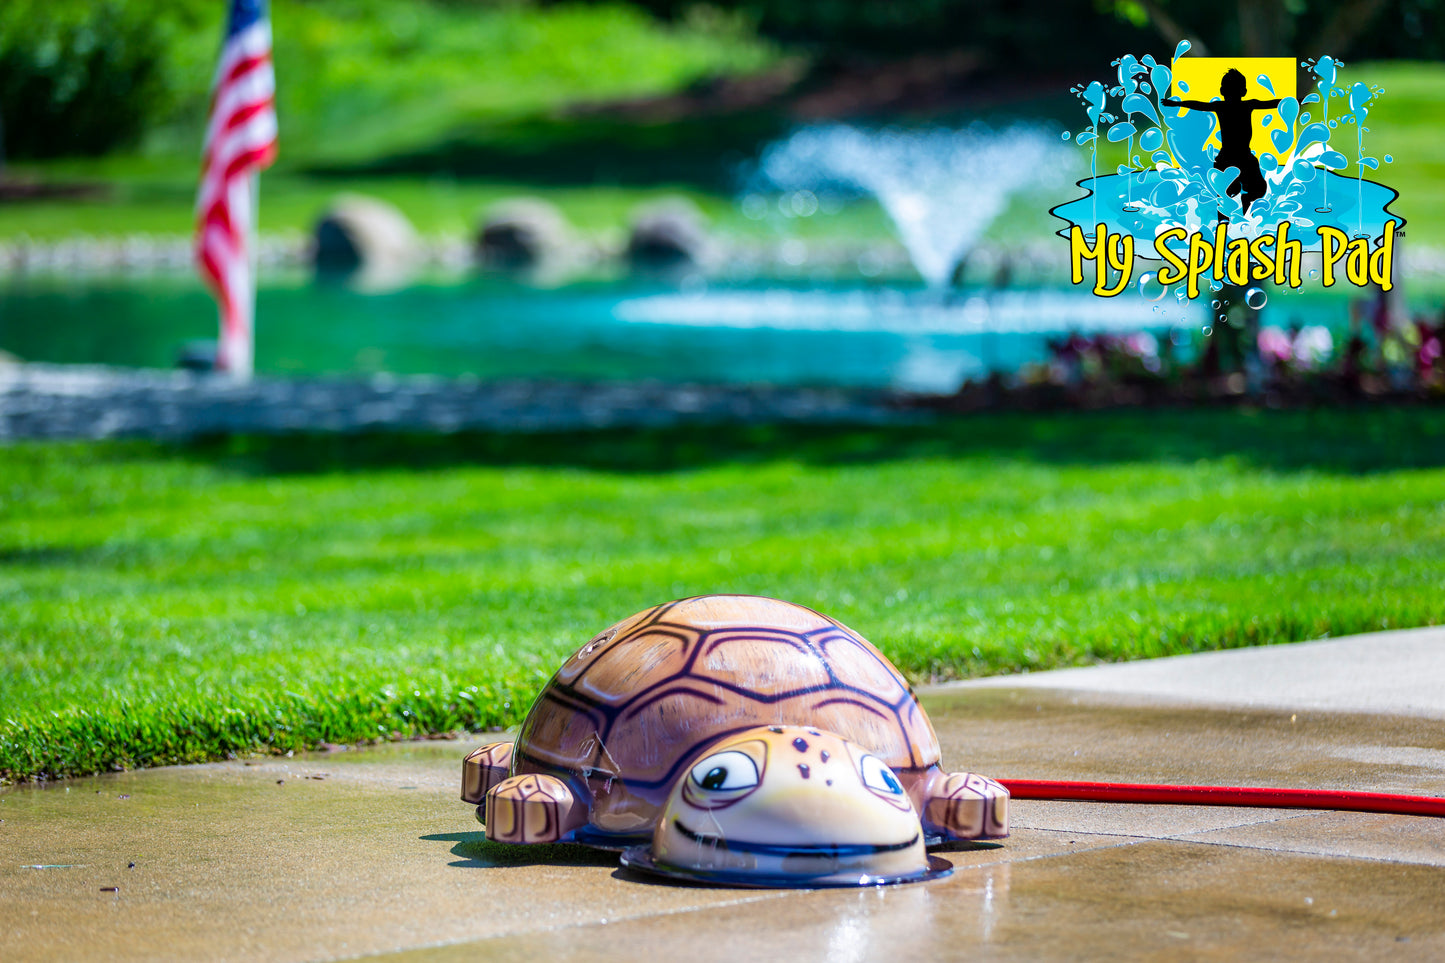 Small Turtle Mobile Water Play Features